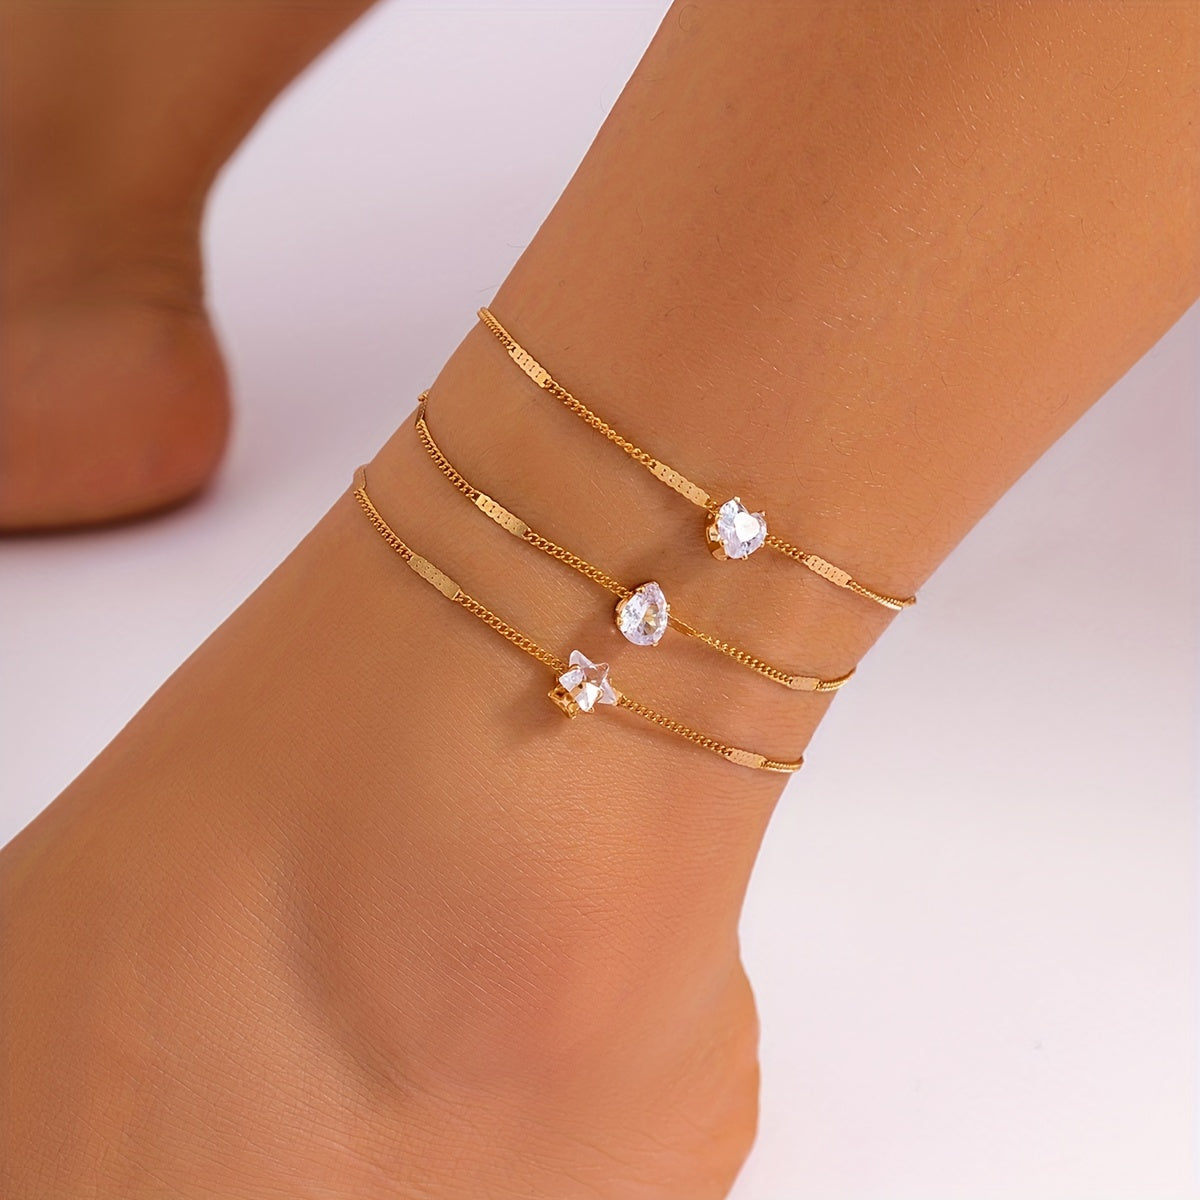 Simple Stackable Chain Anklet Inlaid Shiny Zircon Multi Layers Chain Ankle Bracelet For Women Girls